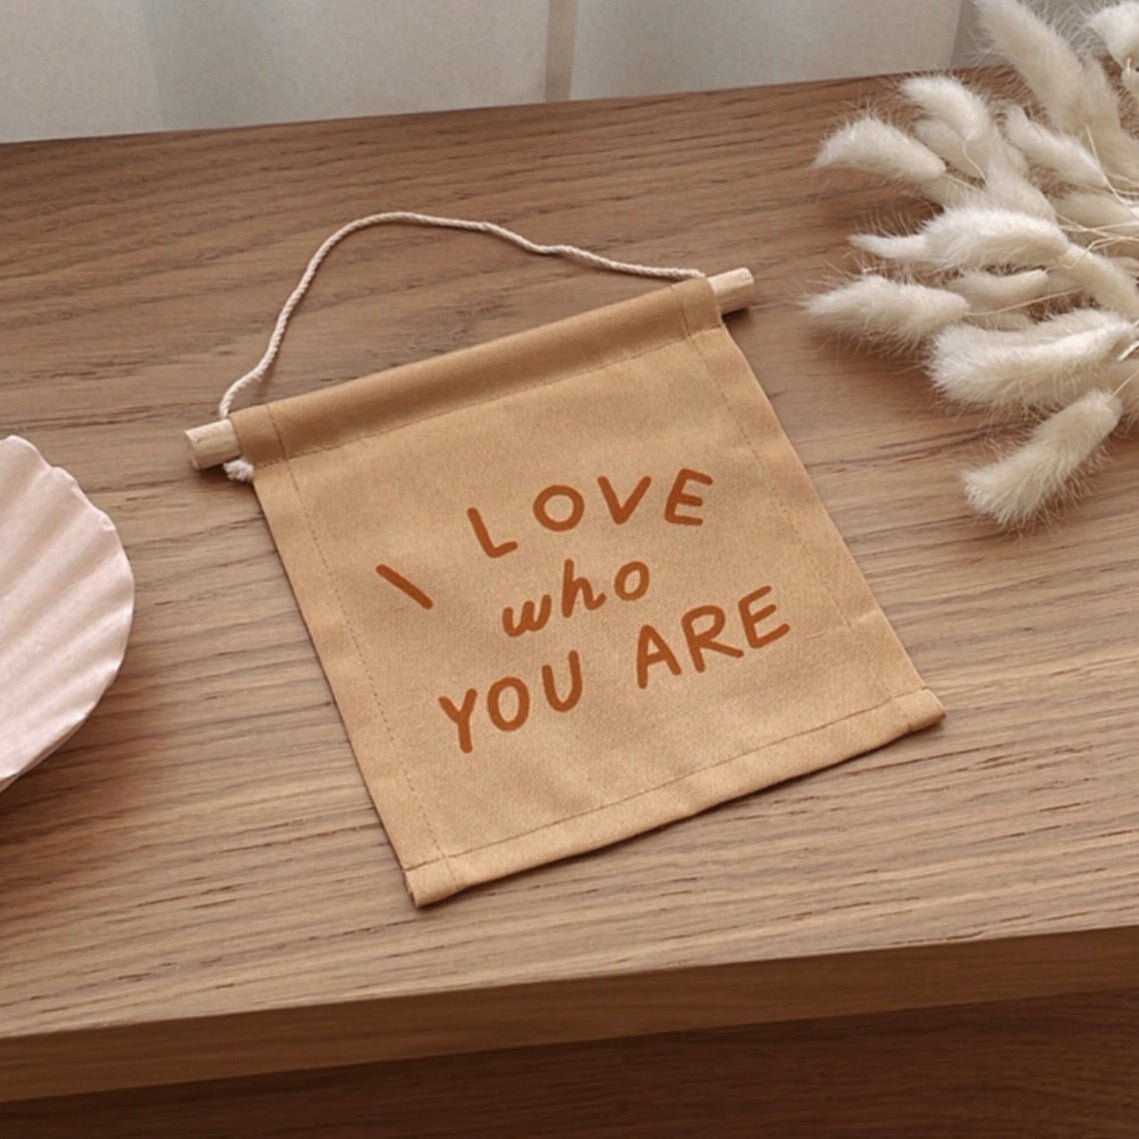 i love who you are hang sign - Sweet Water Decor - Wall Hanging